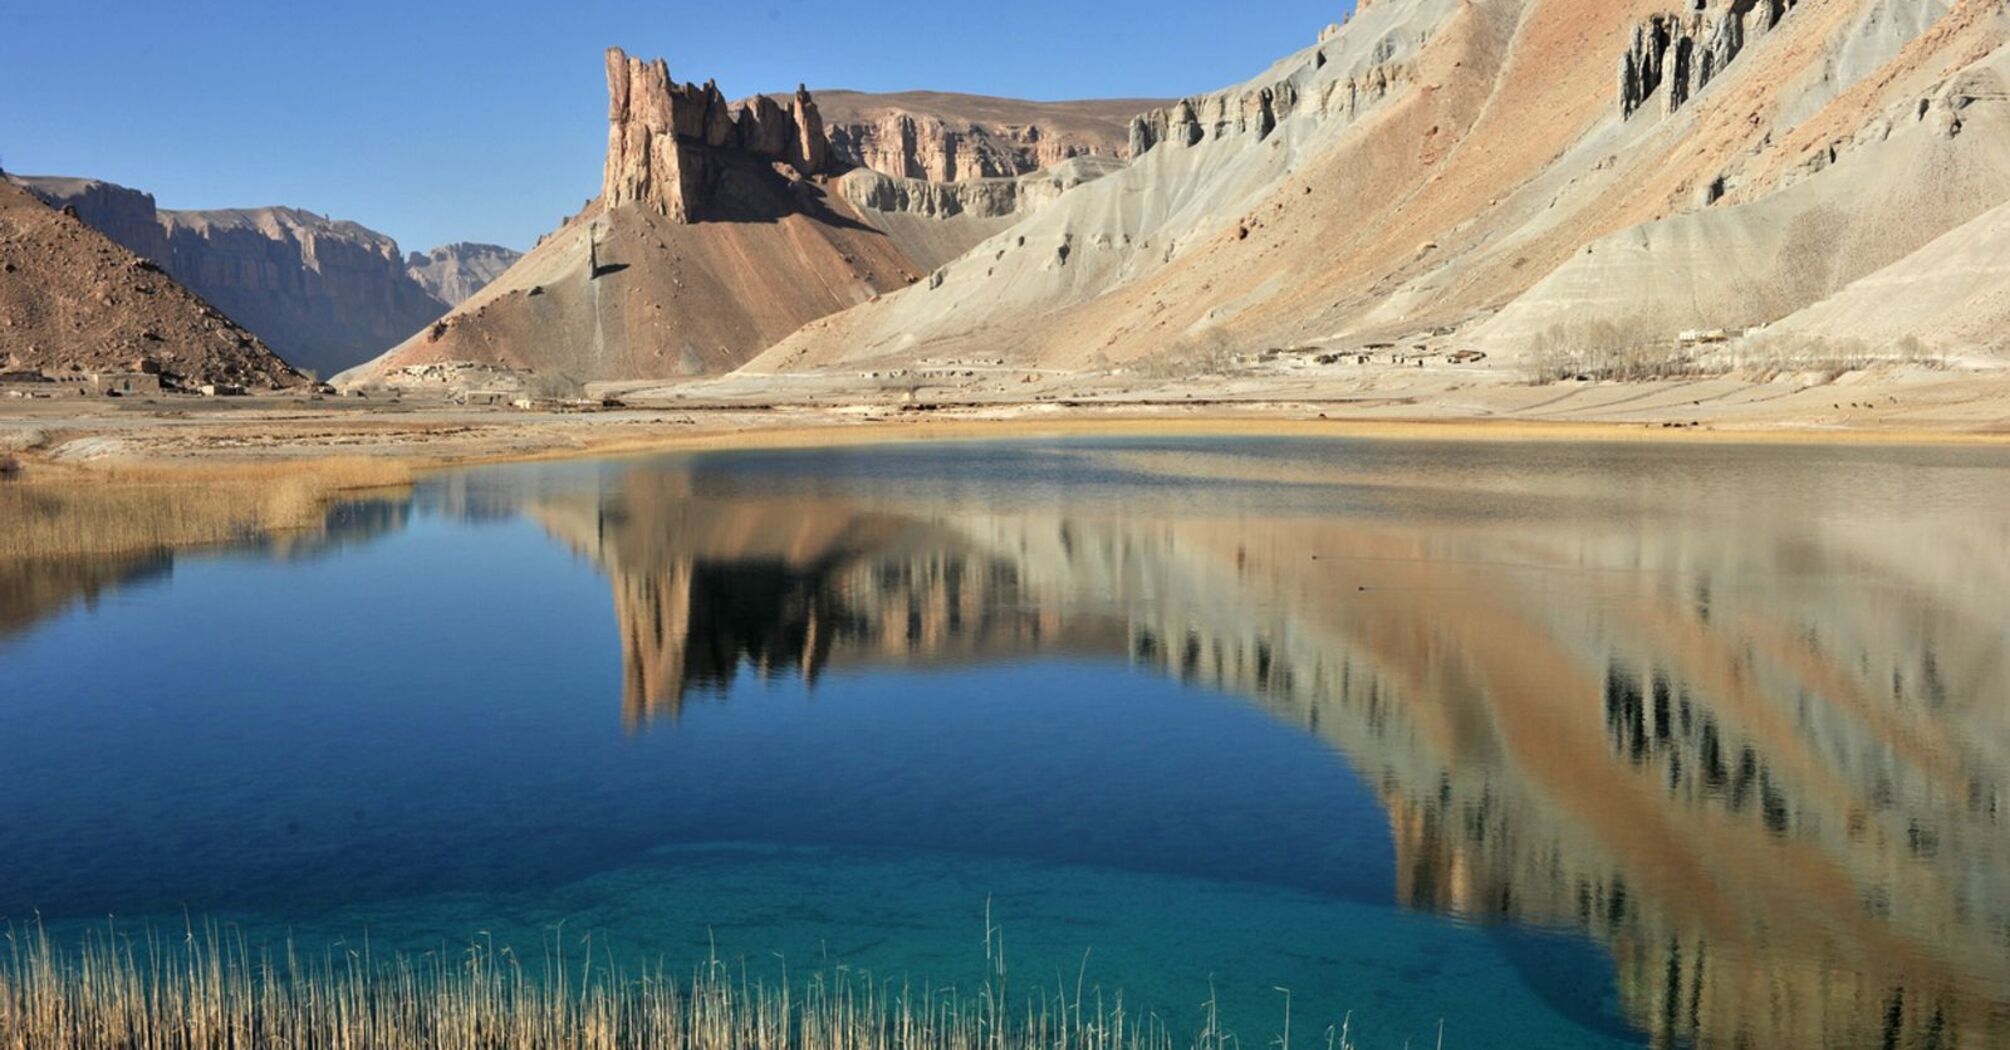 Women are banned from entering Band-e-Amir National Park